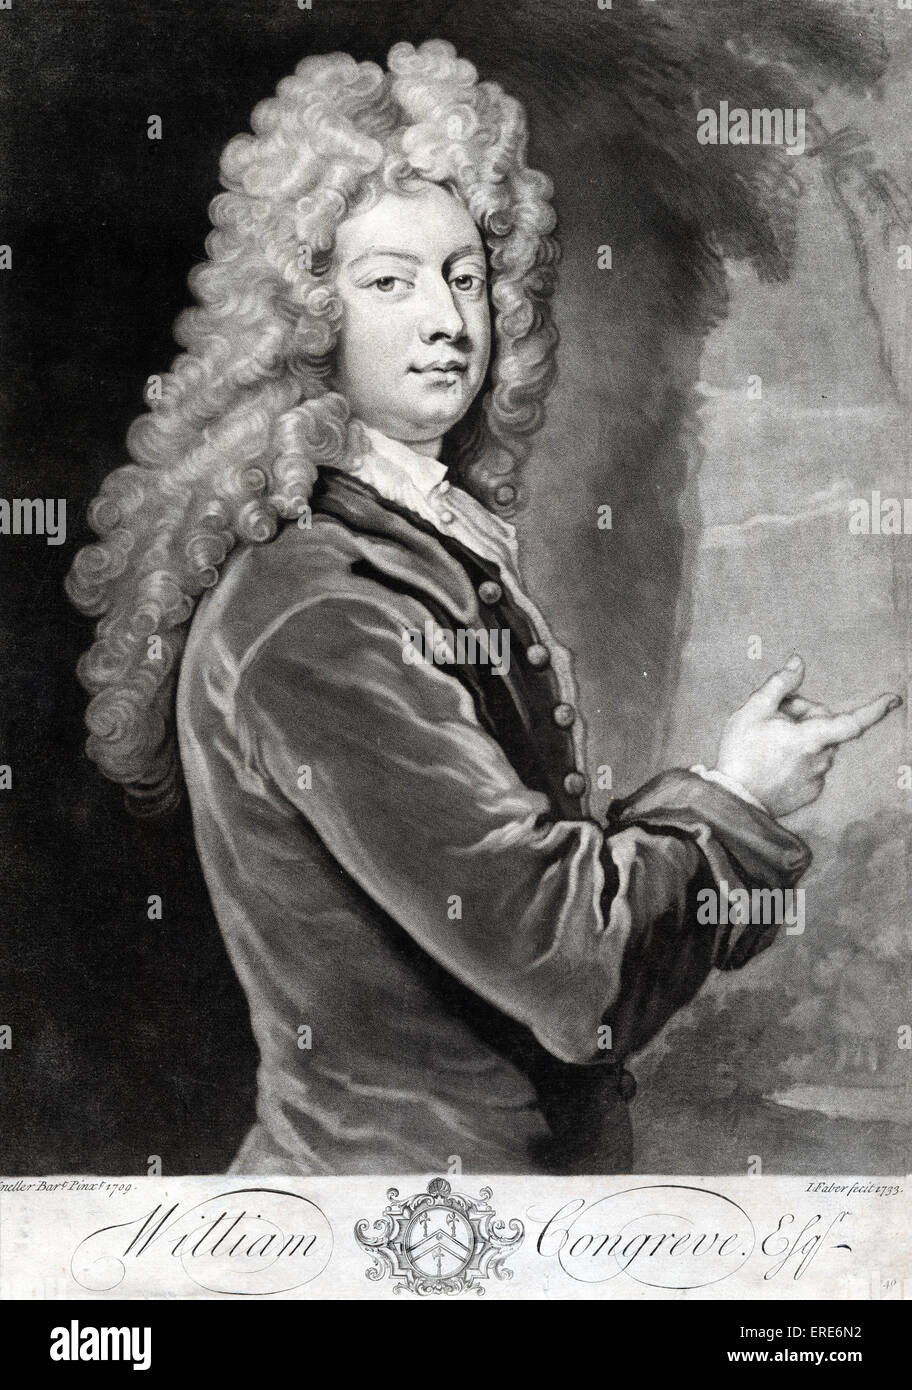 William Congreve 1733. Mezzotint. Painting by J. Faber Kneller, Bart. pinx, 1709. English playwright and poet, 24 January 1670 - 19 January 1729. Stock Photo